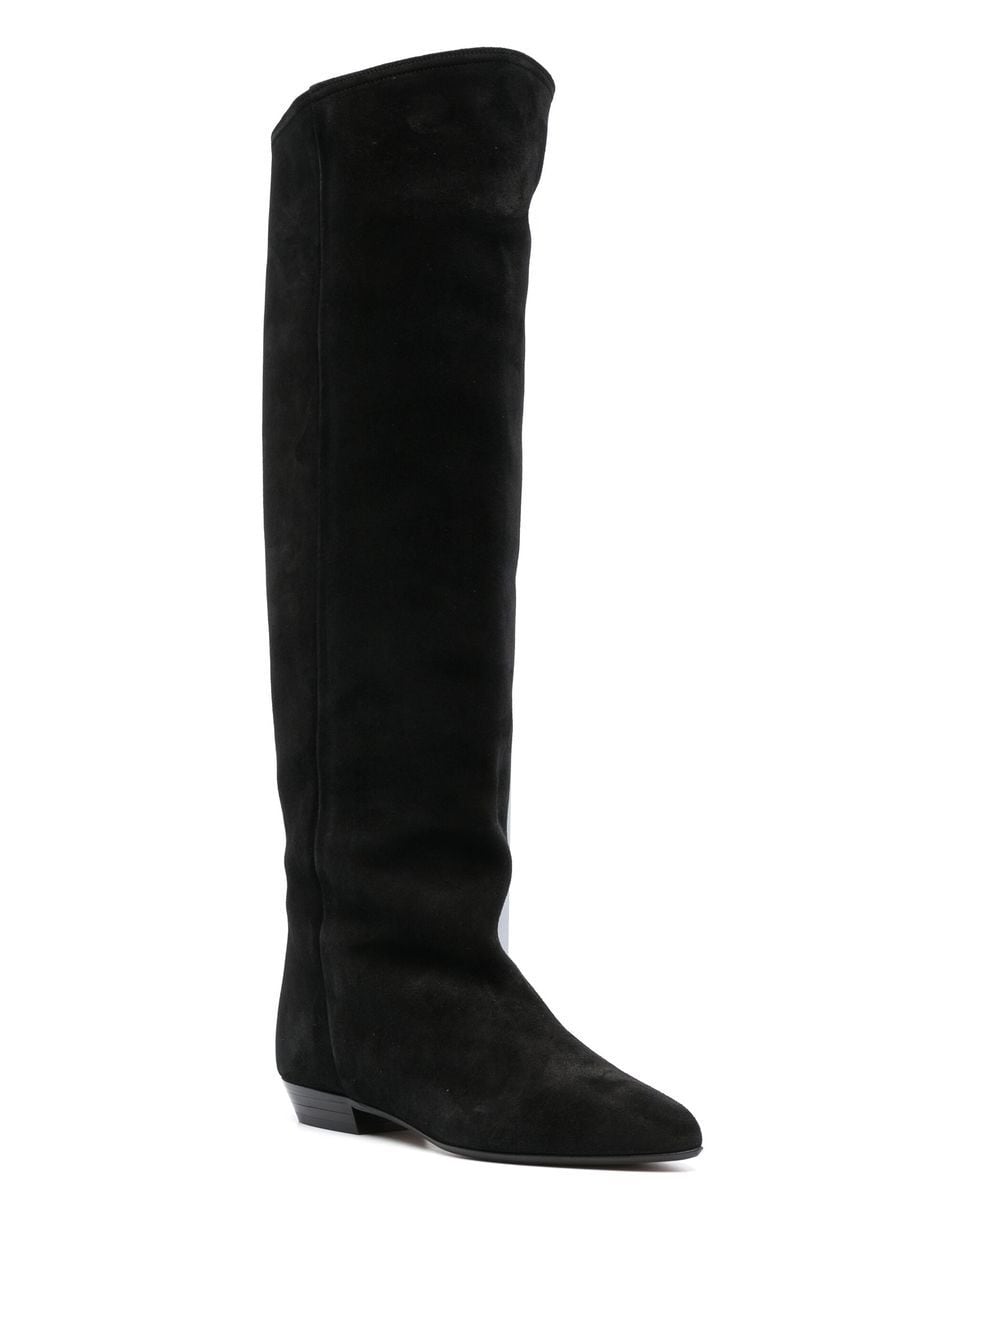 ISABEL MARANT Women's Black Suede Knee Boots - FW23 Collection